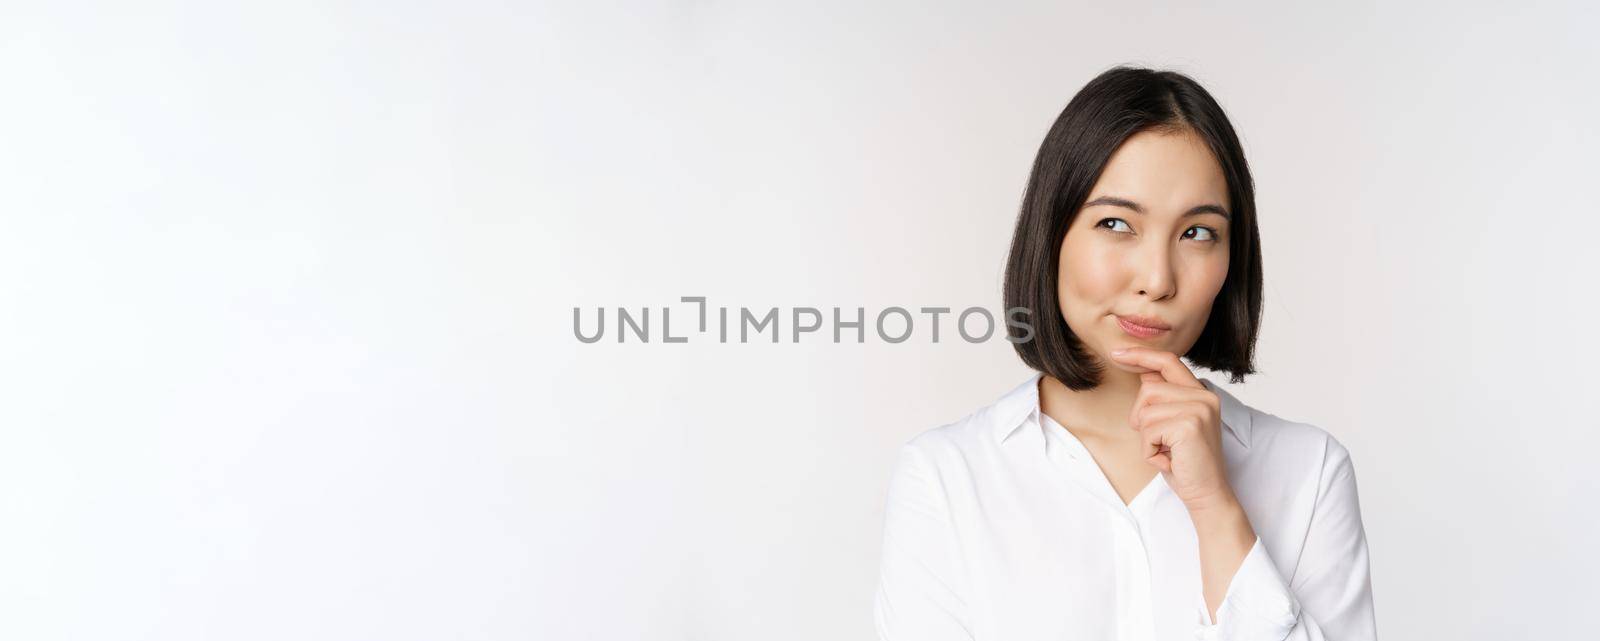 Close up portrait of asian woman thinking, looking aside and pondering, making decision, standing over white background.